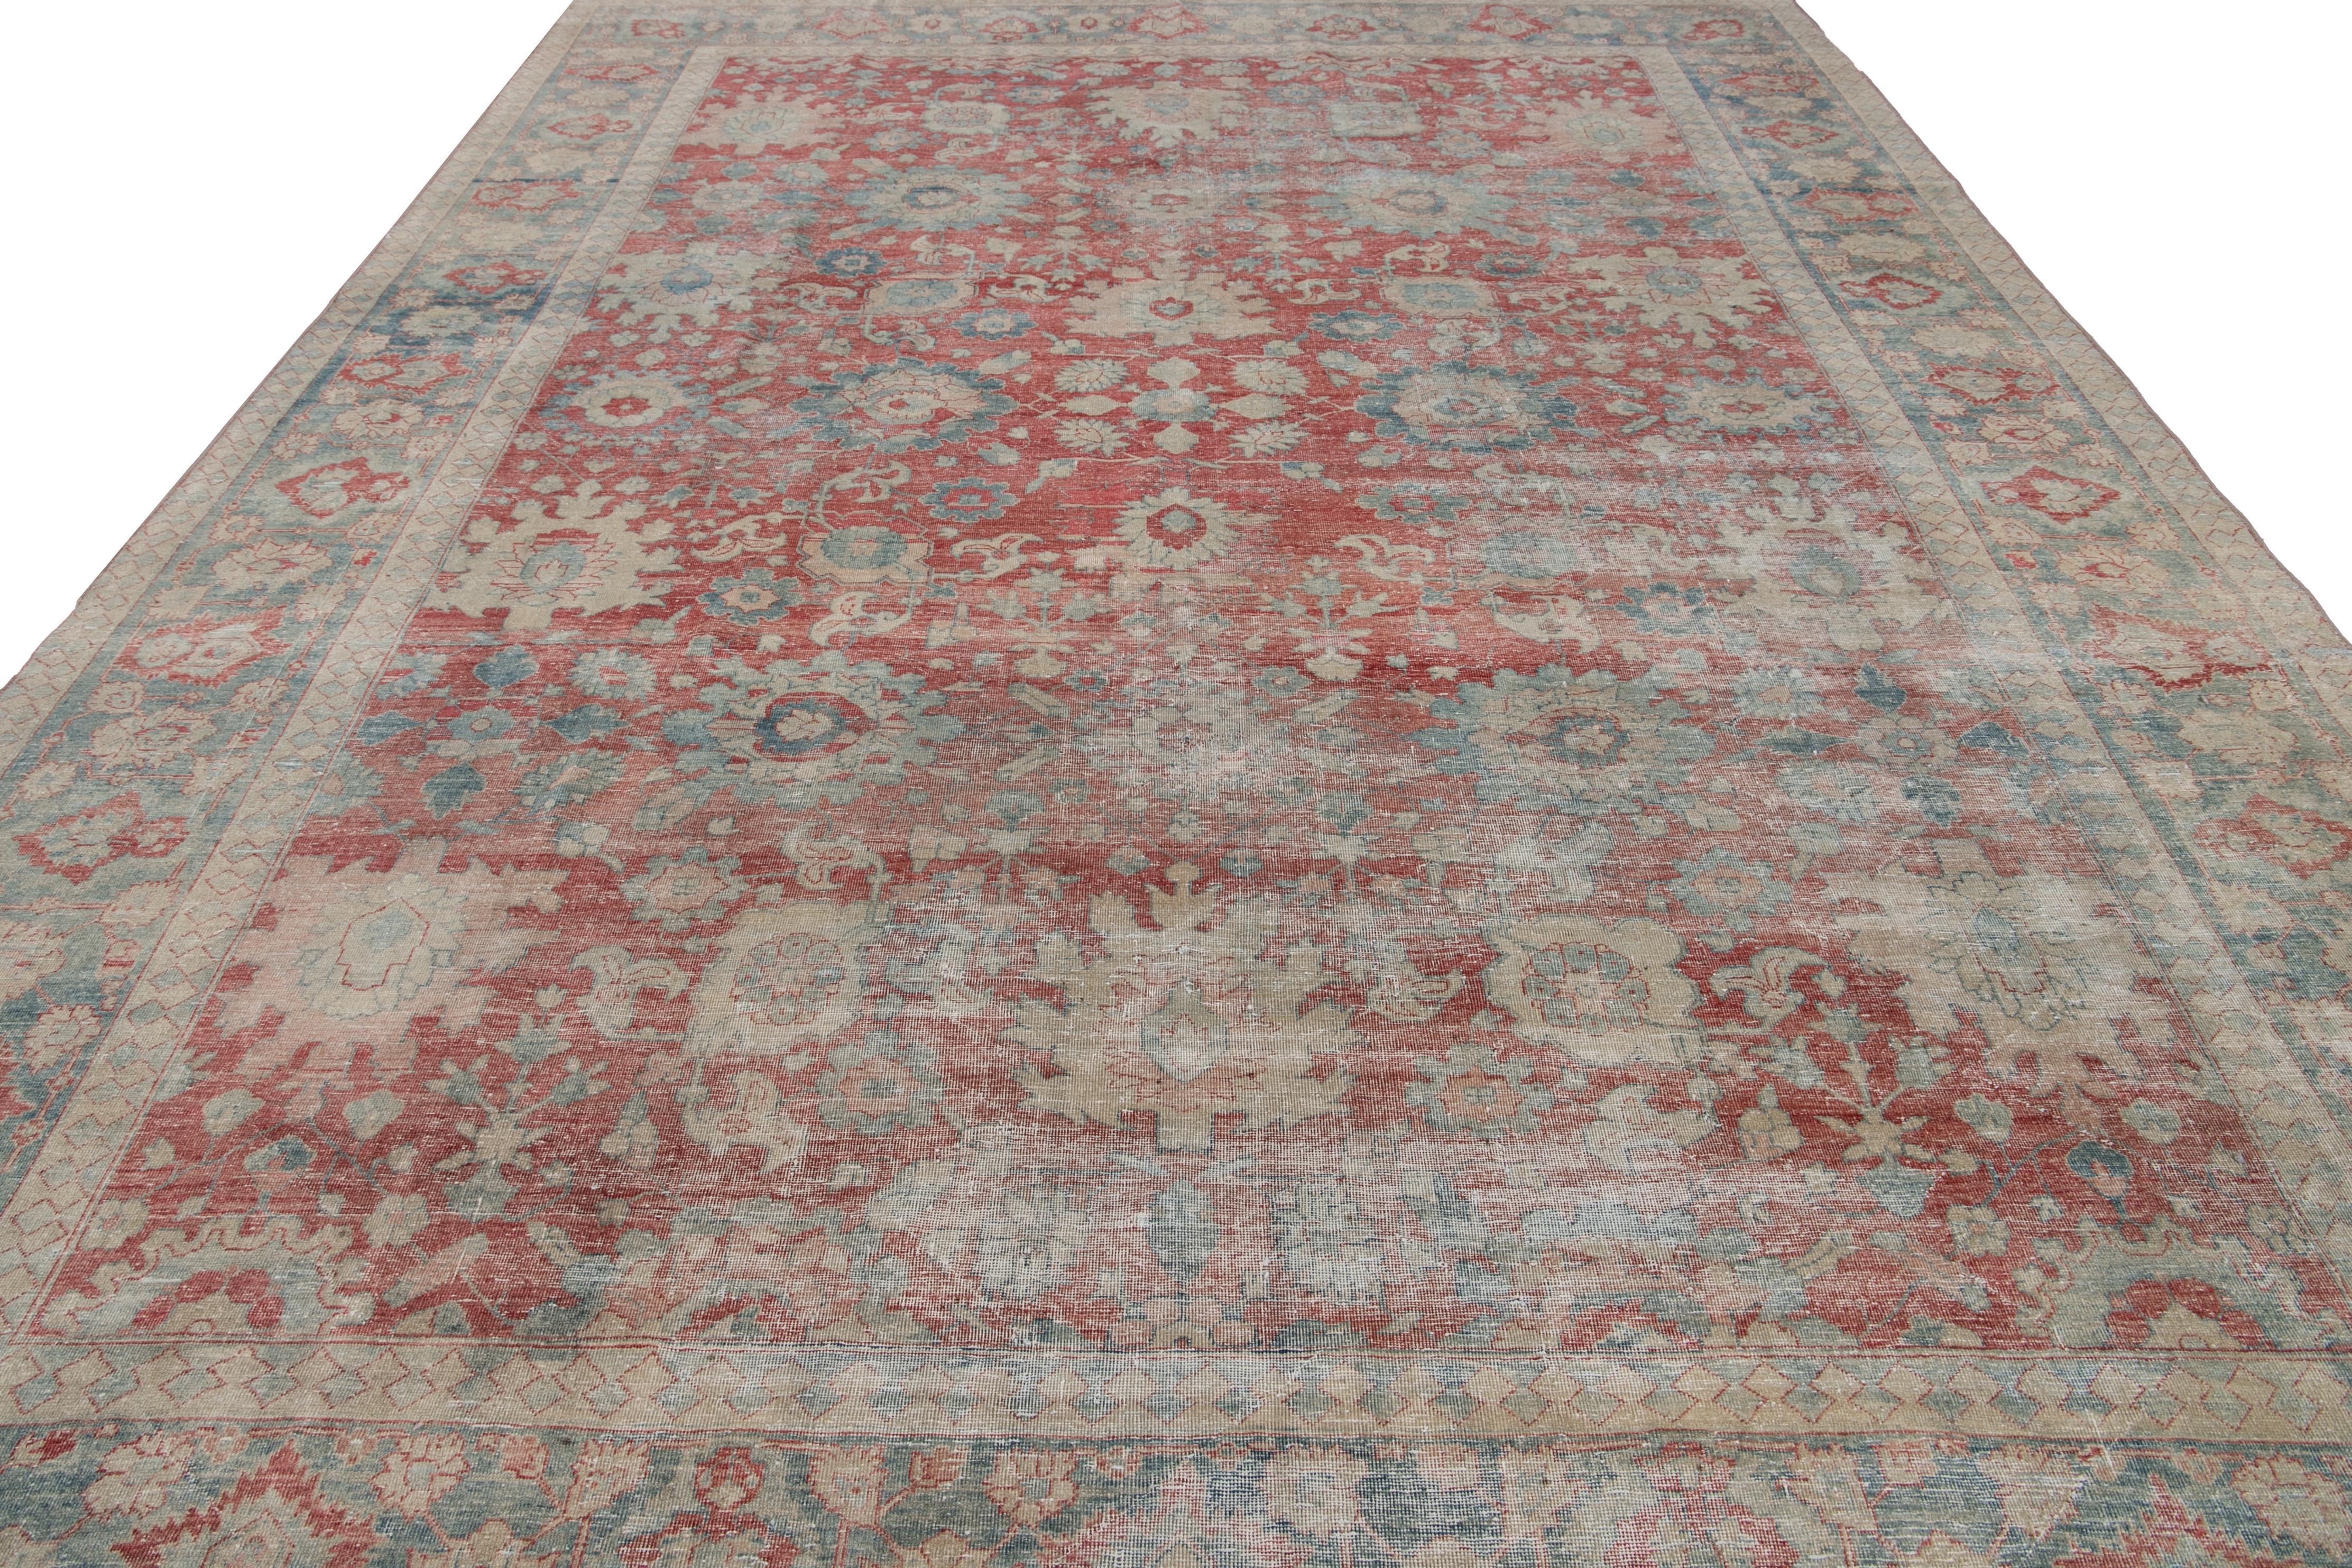 Islamic Antique Mahal Handmade Red Wool Rug For Sale